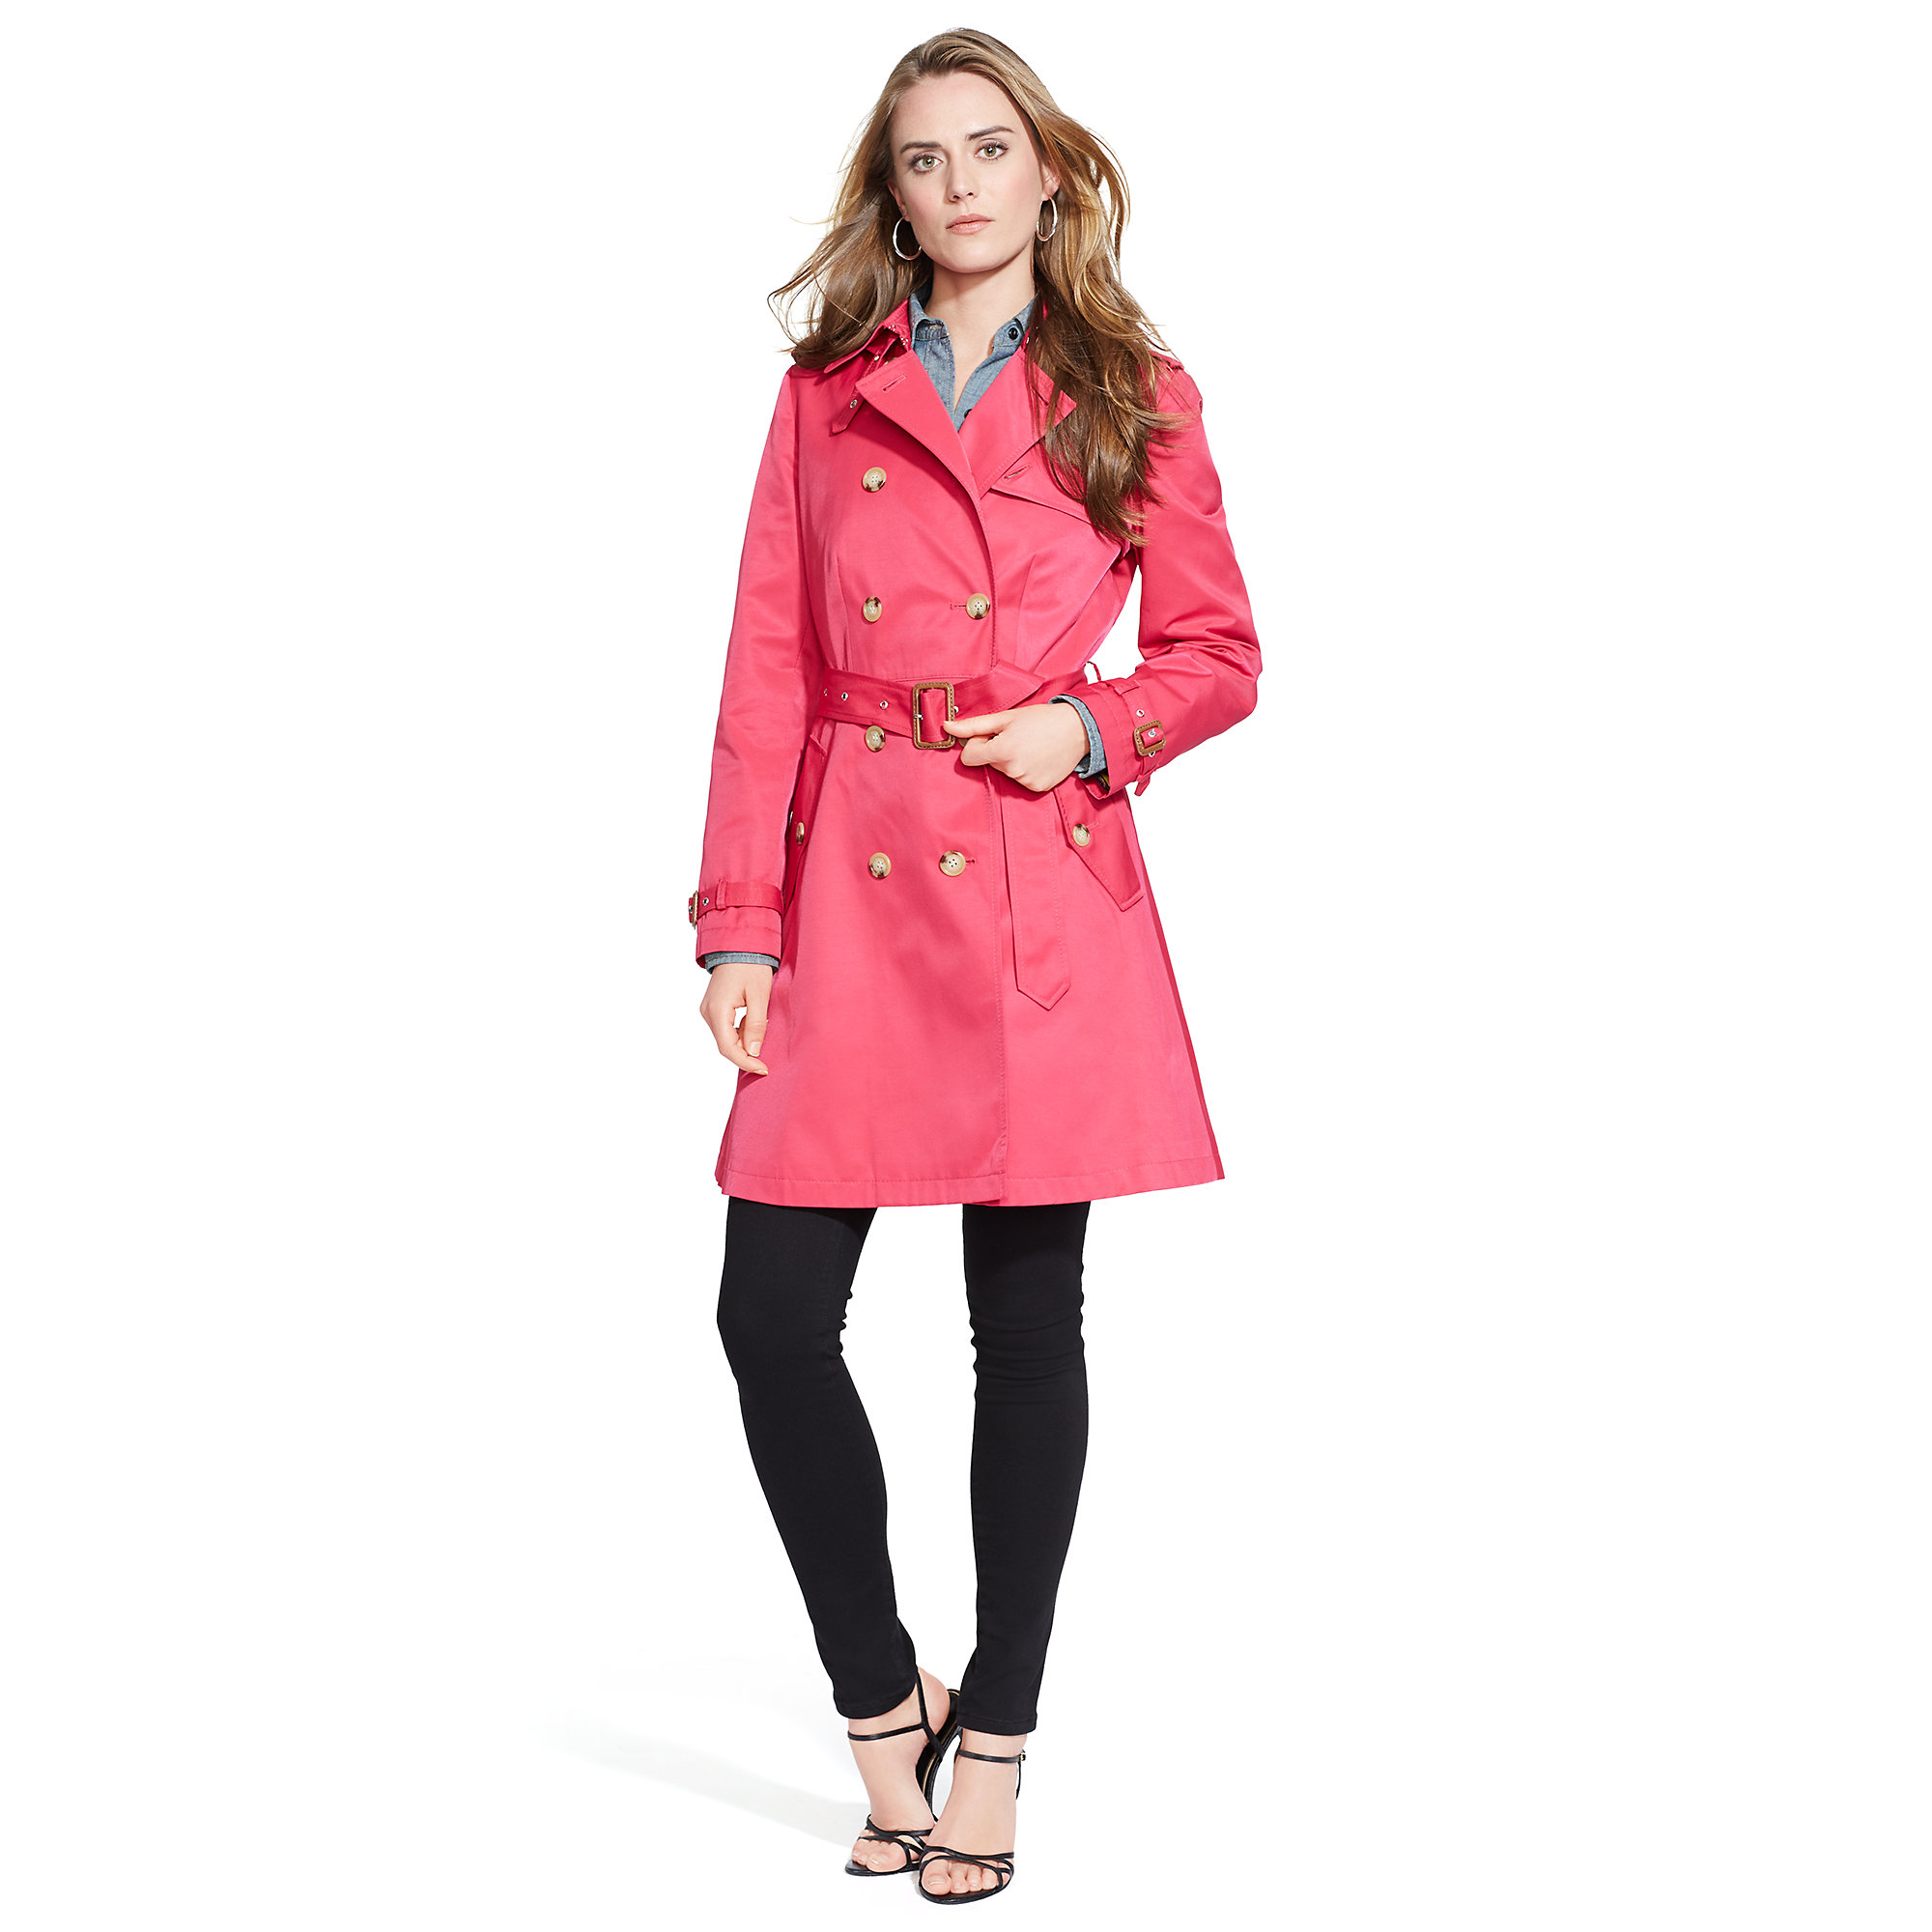 Lyst - Ralph Lauren Double-Breasted Trench Coat in Pink